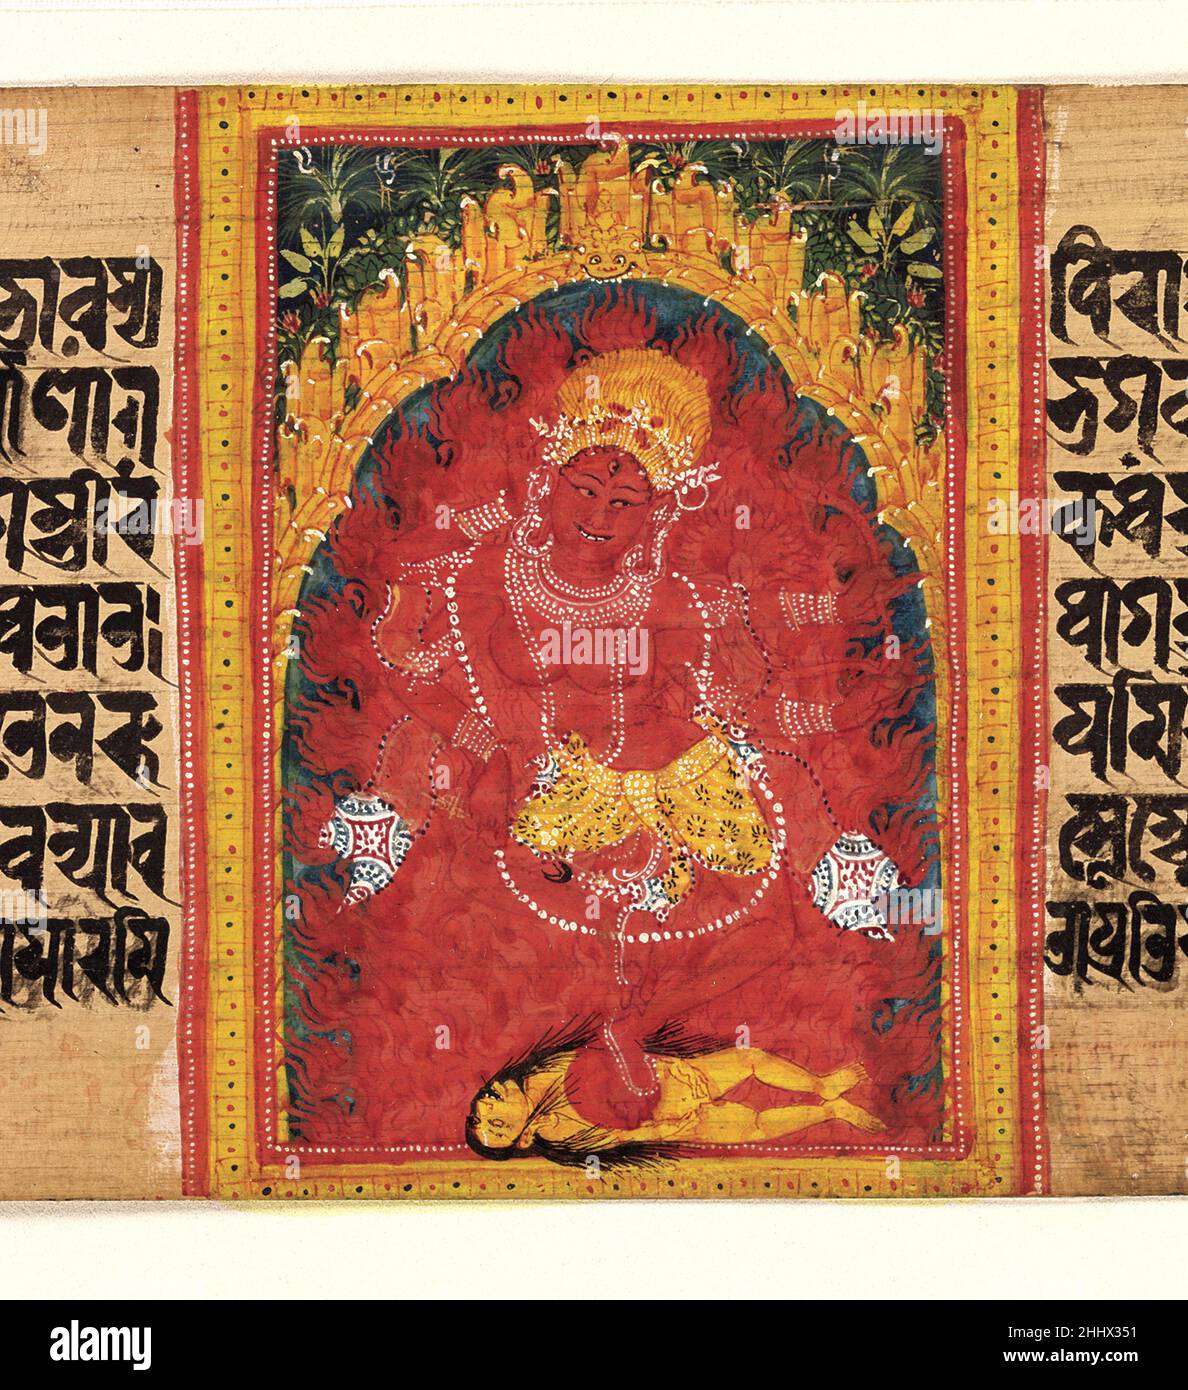 Kurukulla Dancing in Her Mountain Grotto: Folio from a Manuscript of the Ashtasahasrika Prajnaparamita (Perfection of Wisdom) early 12th century India, West Bengal or Bangladesh Emphasizing her role as destroyer of corruption, the goddess Kurukulla is surrounded by a halo of flame and dances on a corpse. Like so many of the aggressive deities that emerged in the esoteric tradition, Kurukulla is understood to be an emanation of one of the Tathagatas—in this case, the calm celestial Buddha Amitabha, who presides over the western Pure Land. Such dualistic female-male or aggressive-pacific relatio Stock Photo